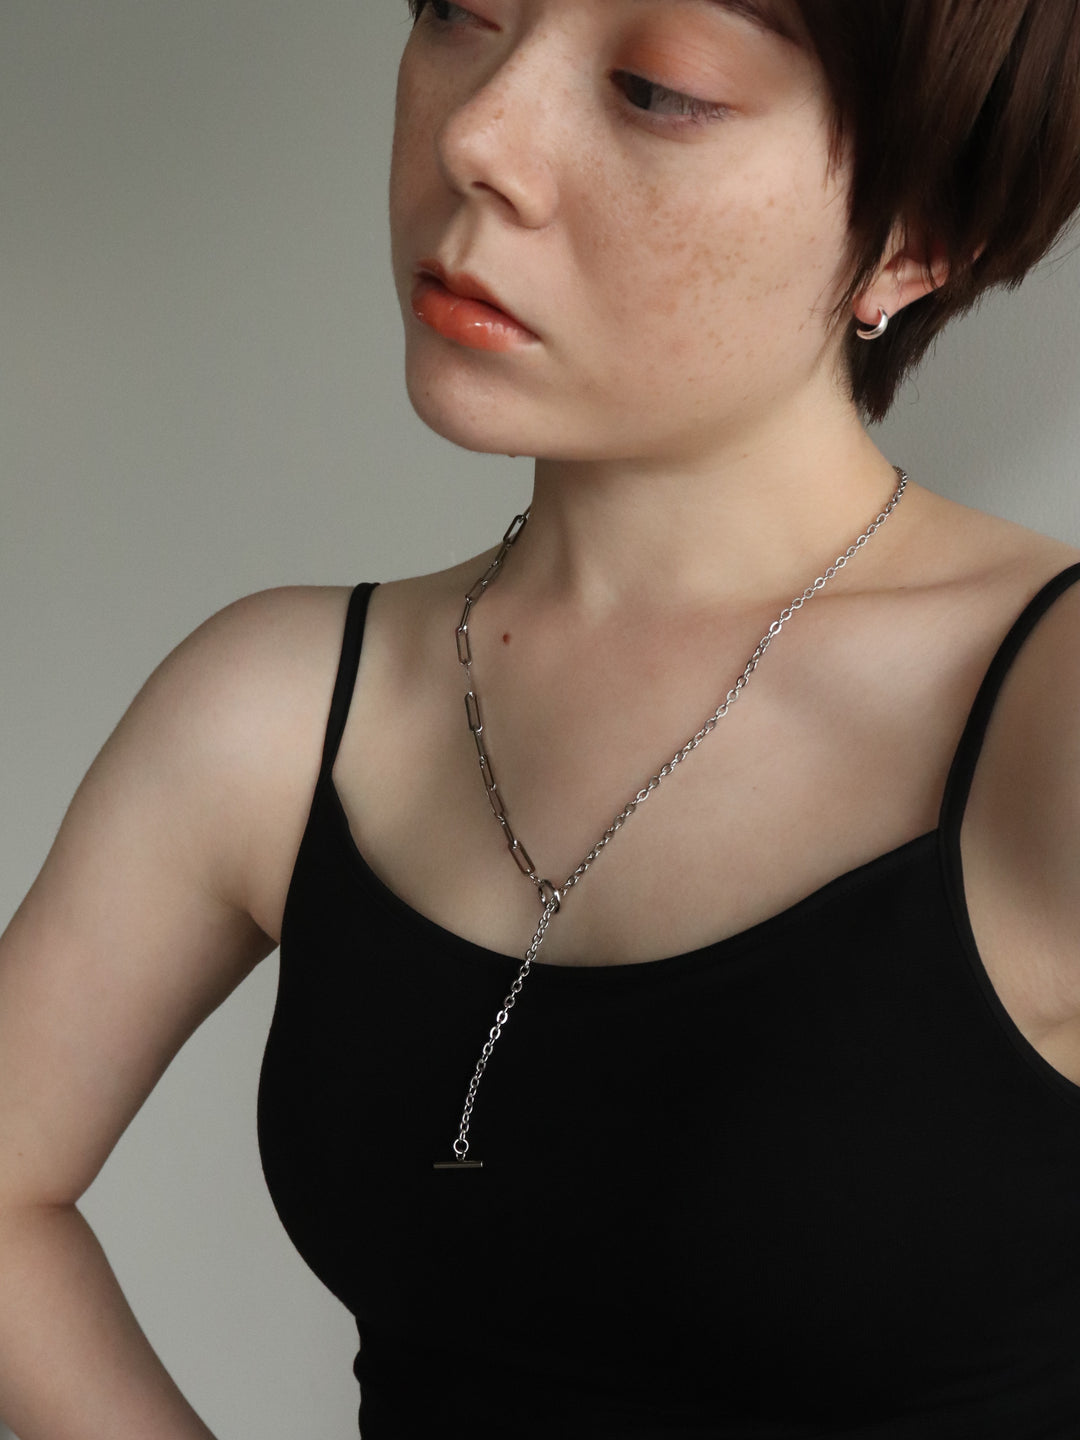 expressive necklace